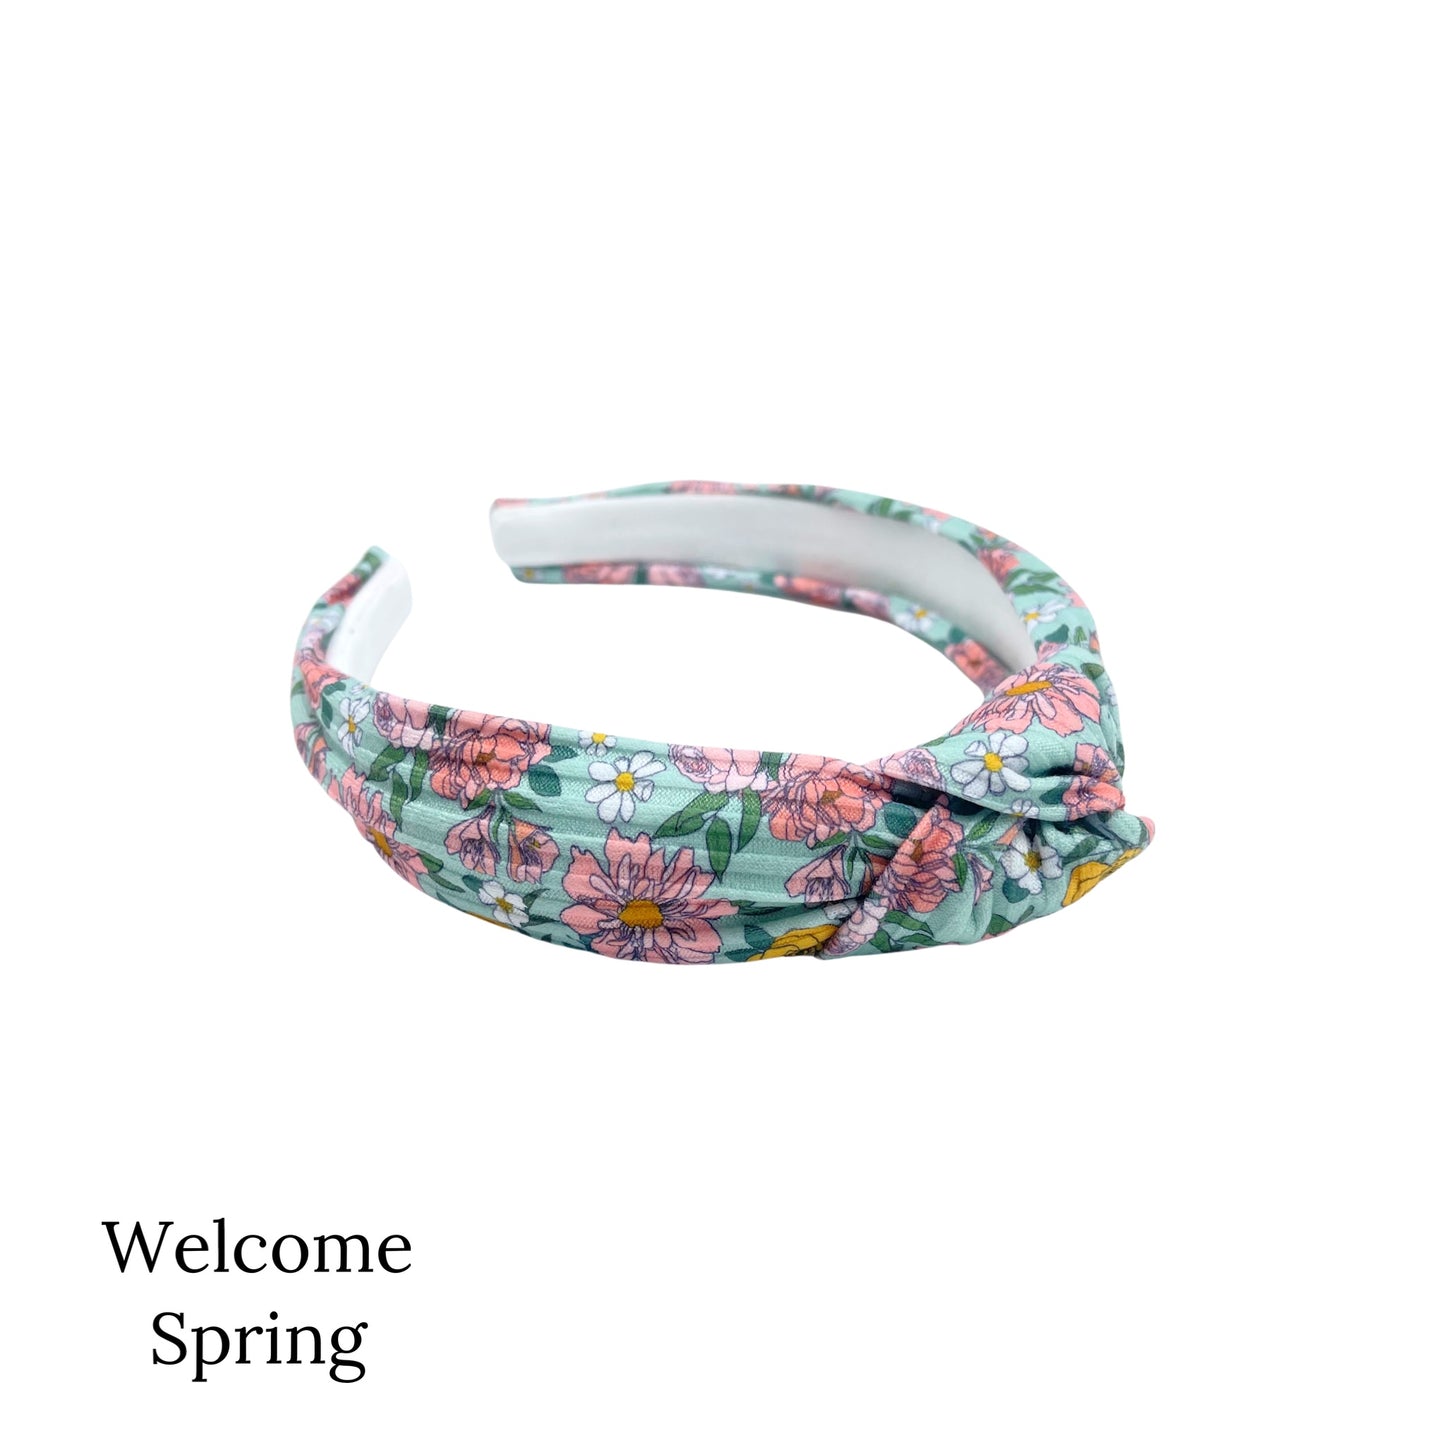 Farm animals knotted headbands. Welcome spring patterned headband. 